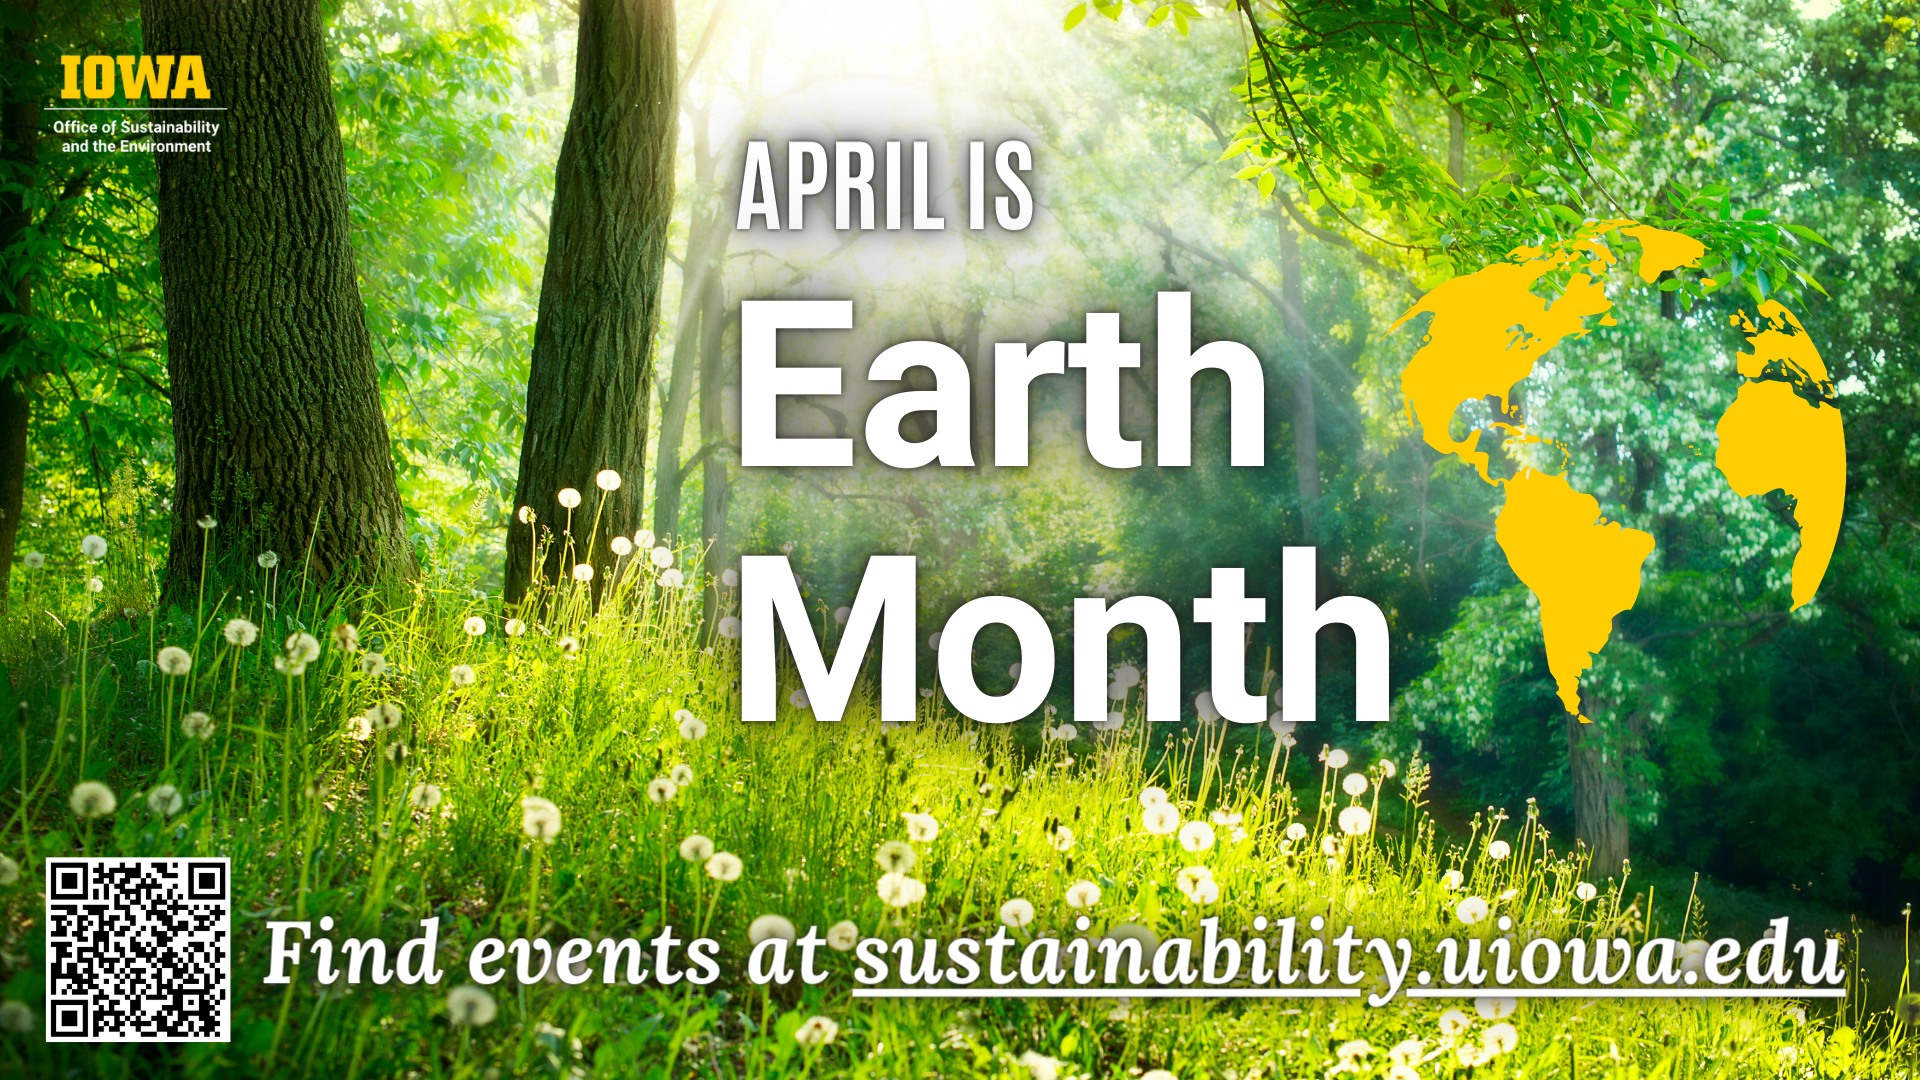 April is Earth Month. visit sustainability dot uiowa dot edu for events